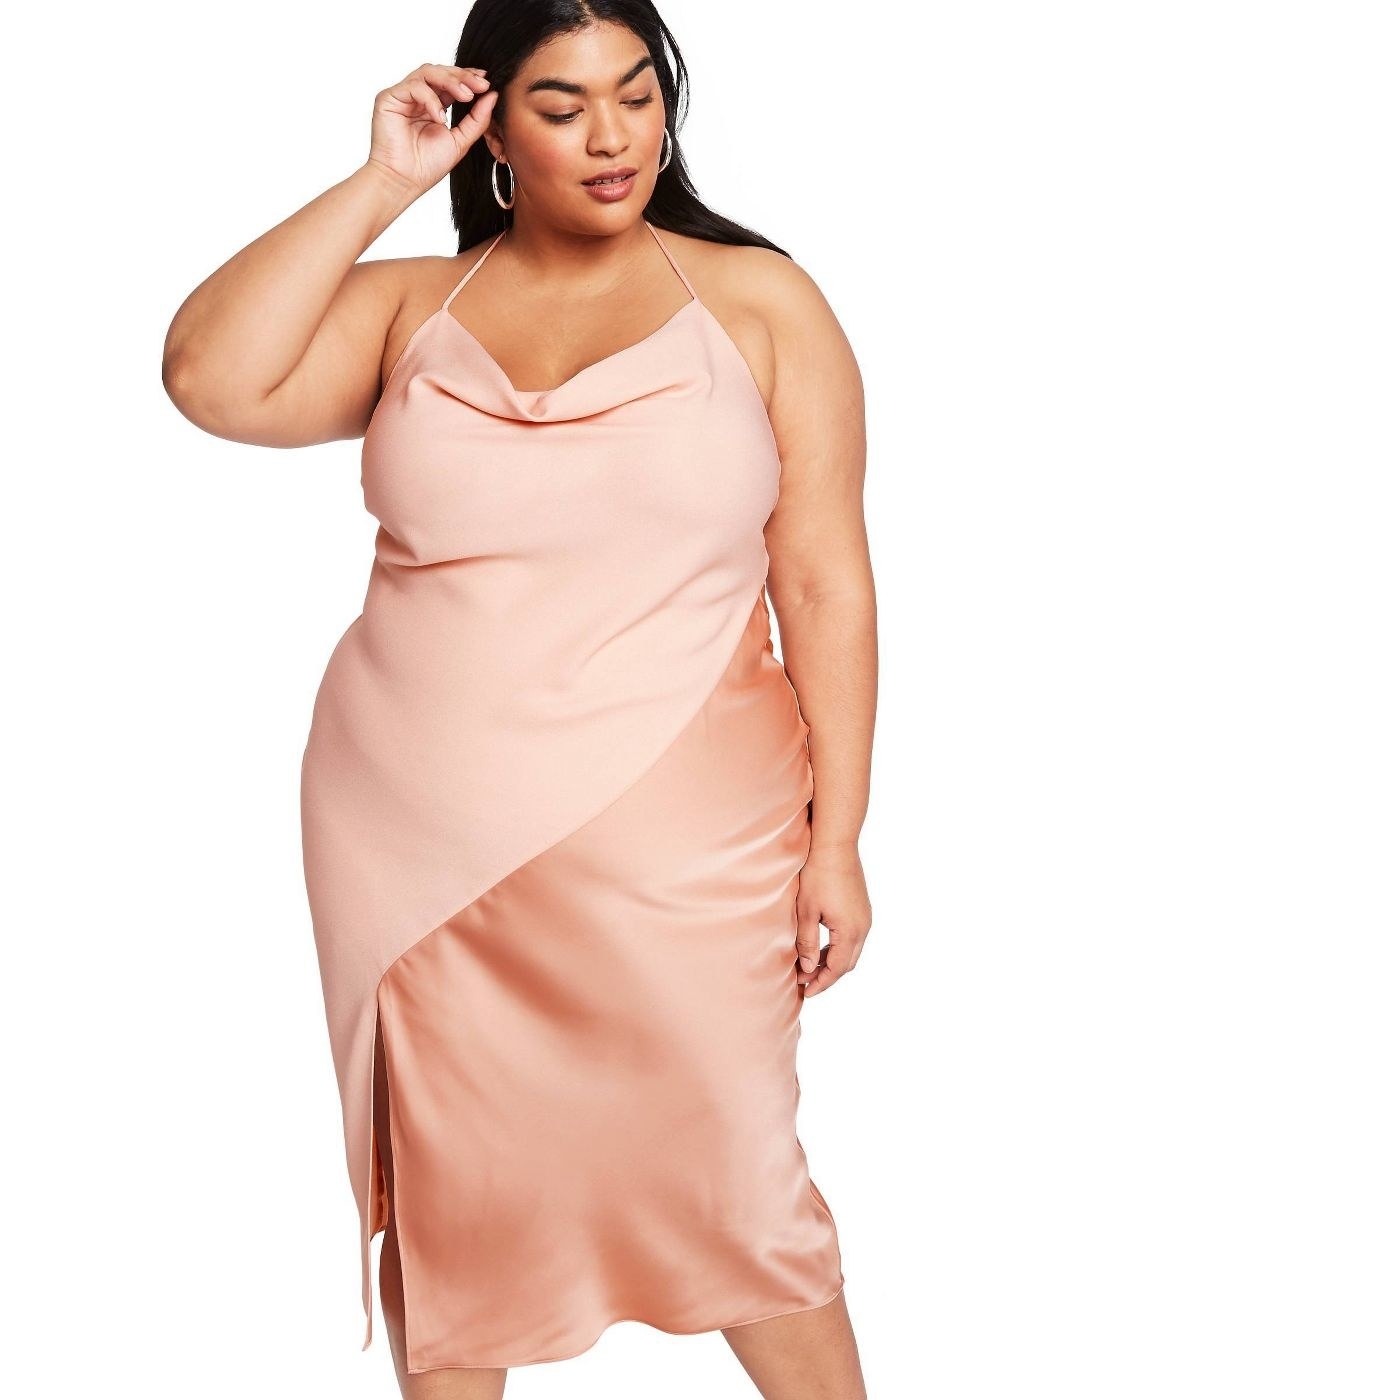 Plus-Size Dresses You Can Get At Target